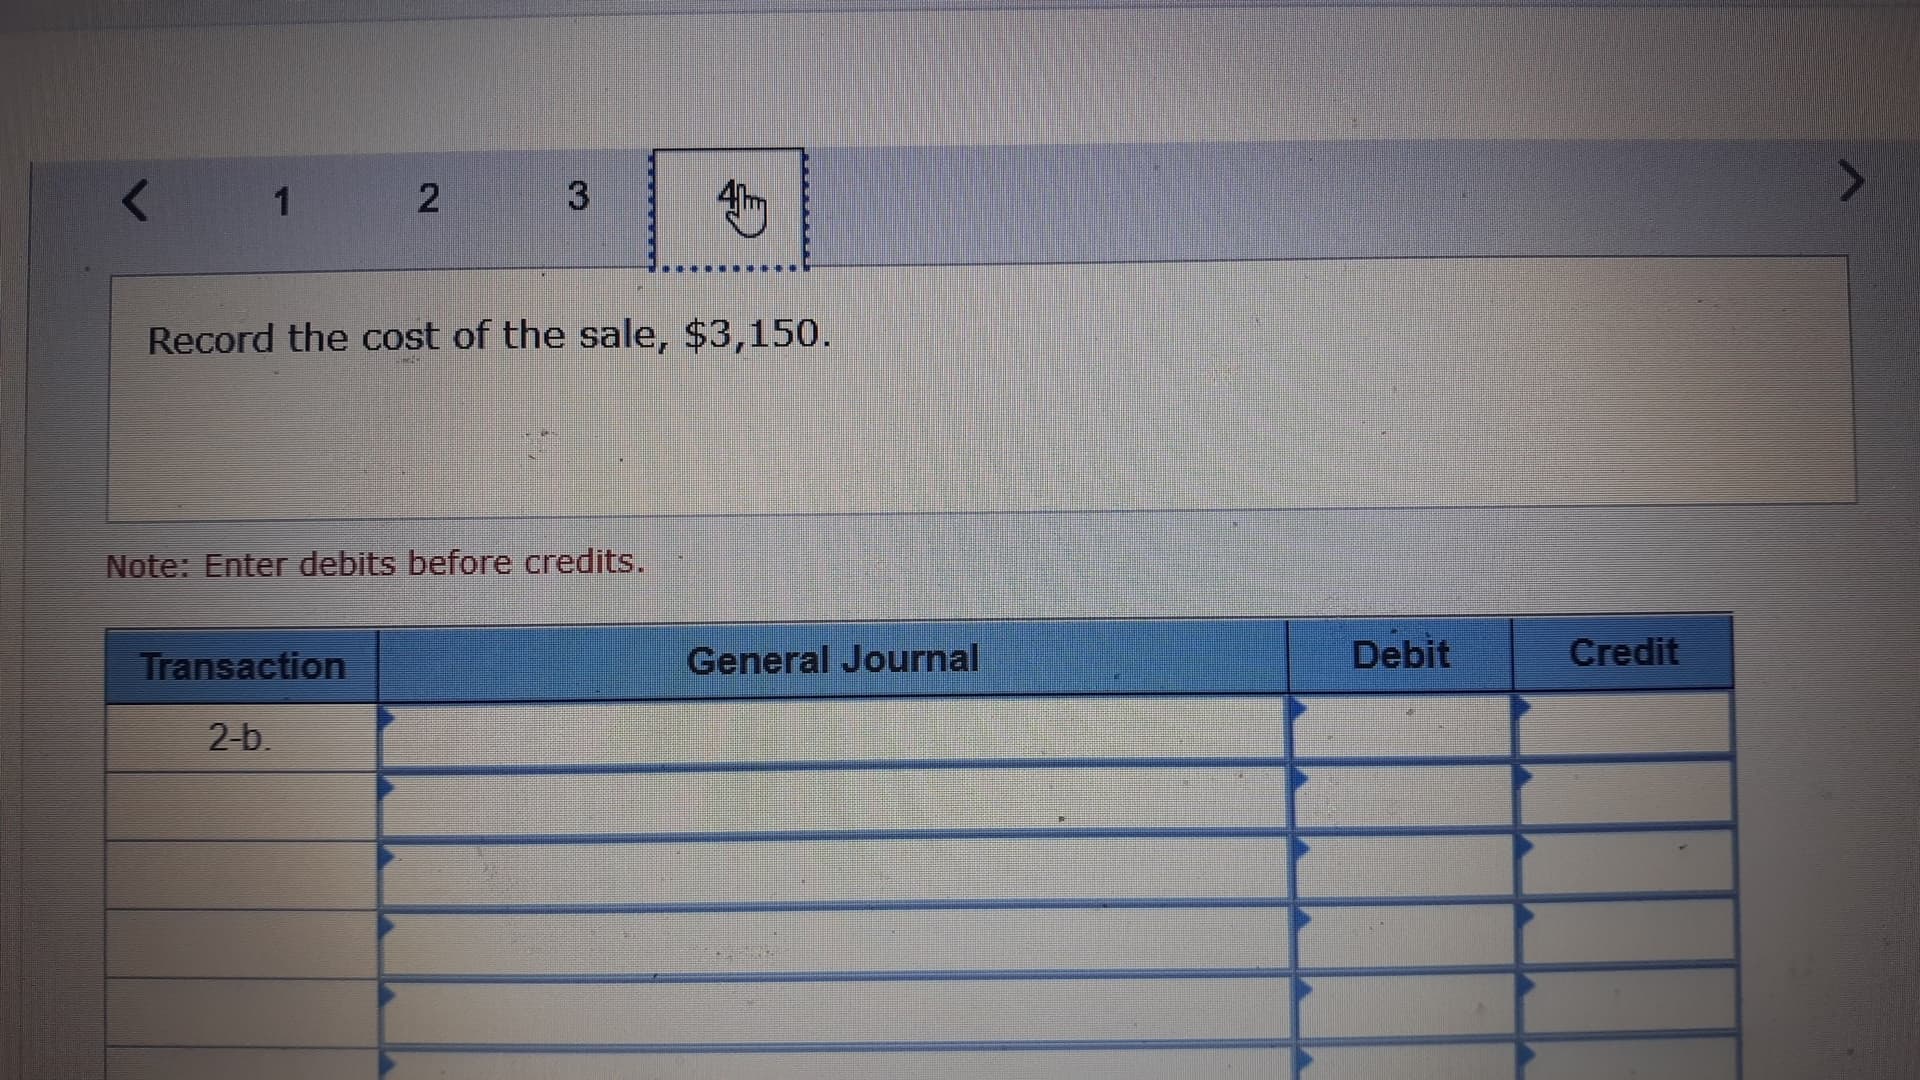 3
2
1
Record the cost of the sale, $3,150.
Note: Enter debits before credits.
Debit
Credit
General Journal
Transaction
2-b
